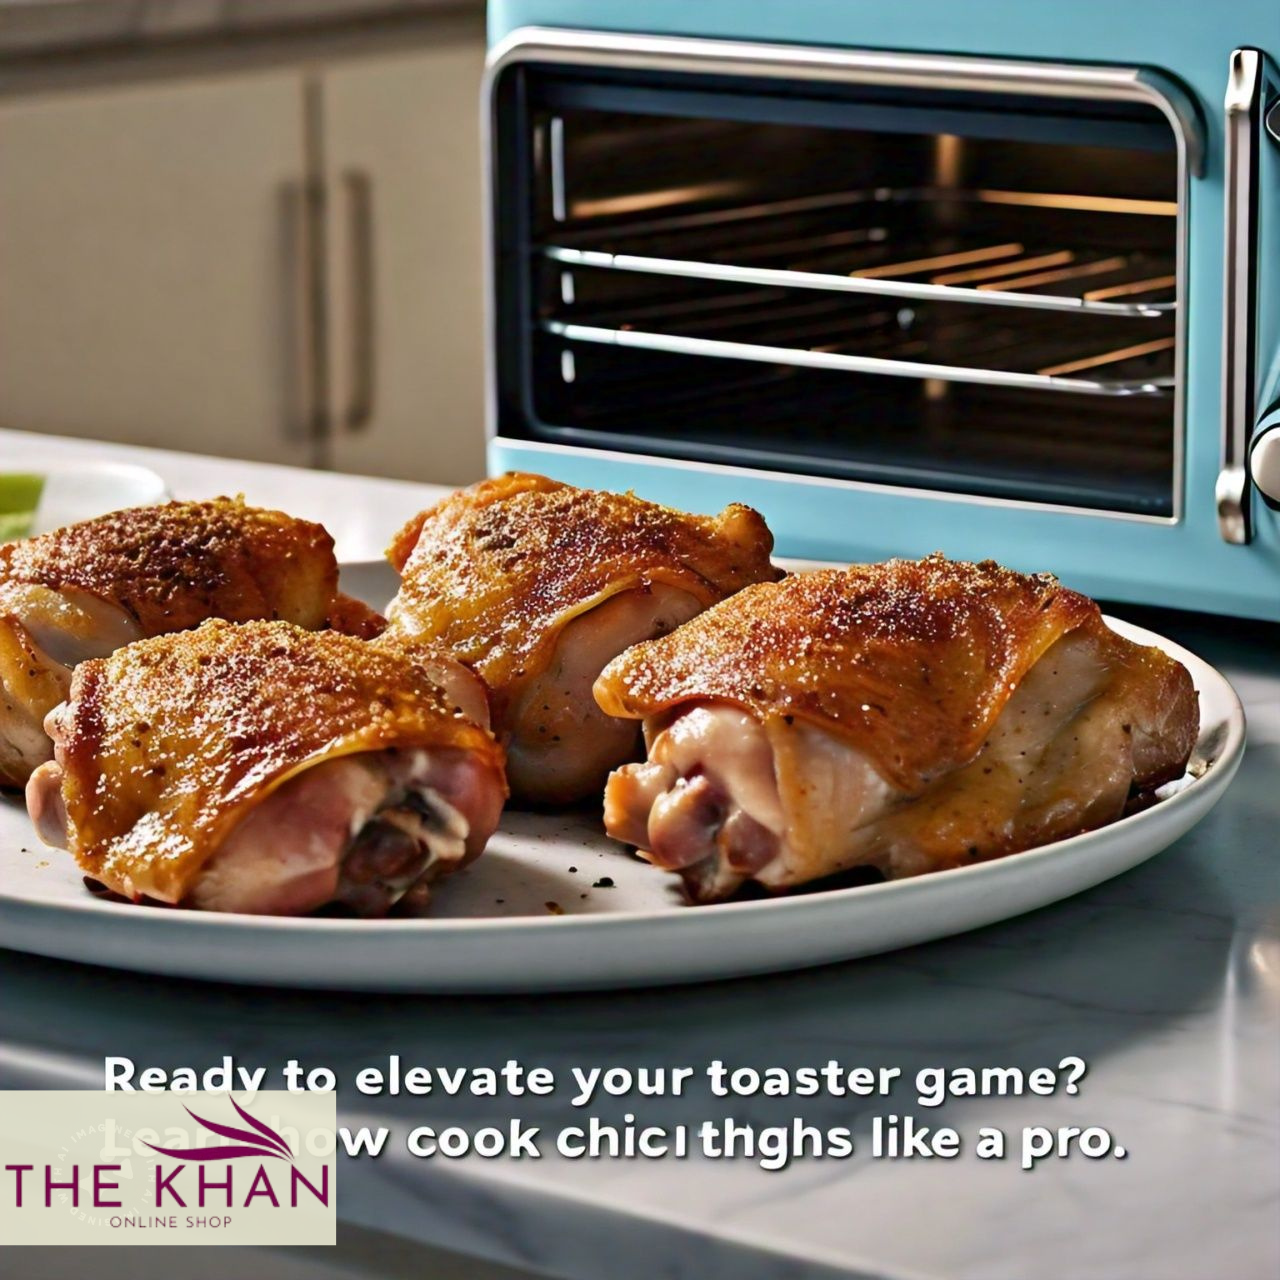 Cook Chicken Thighs in a Toaster Oven